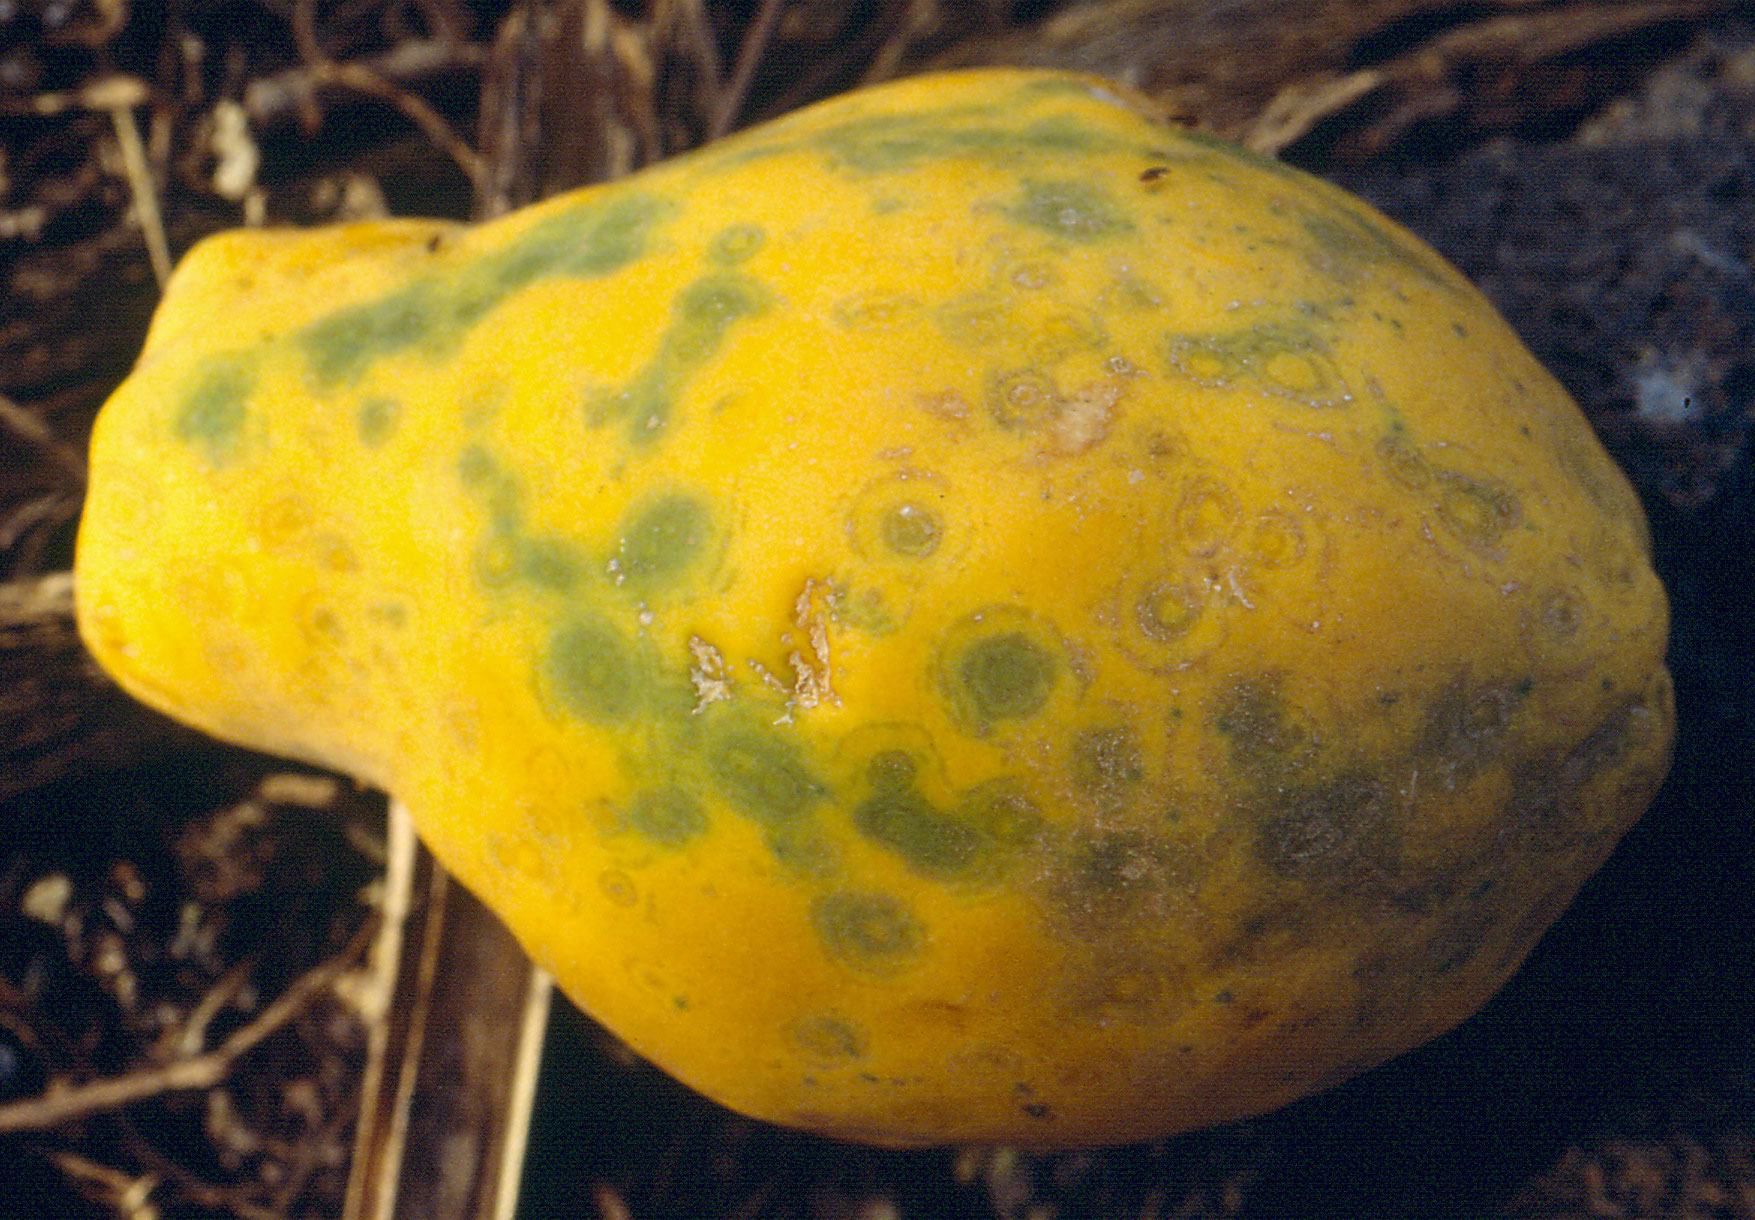 Photograph of a papaya fruit infected with ringspot virus laying on the ground. The fruit is urn-shaped and yellow with green and yellow spots surrounded by concentric rings.